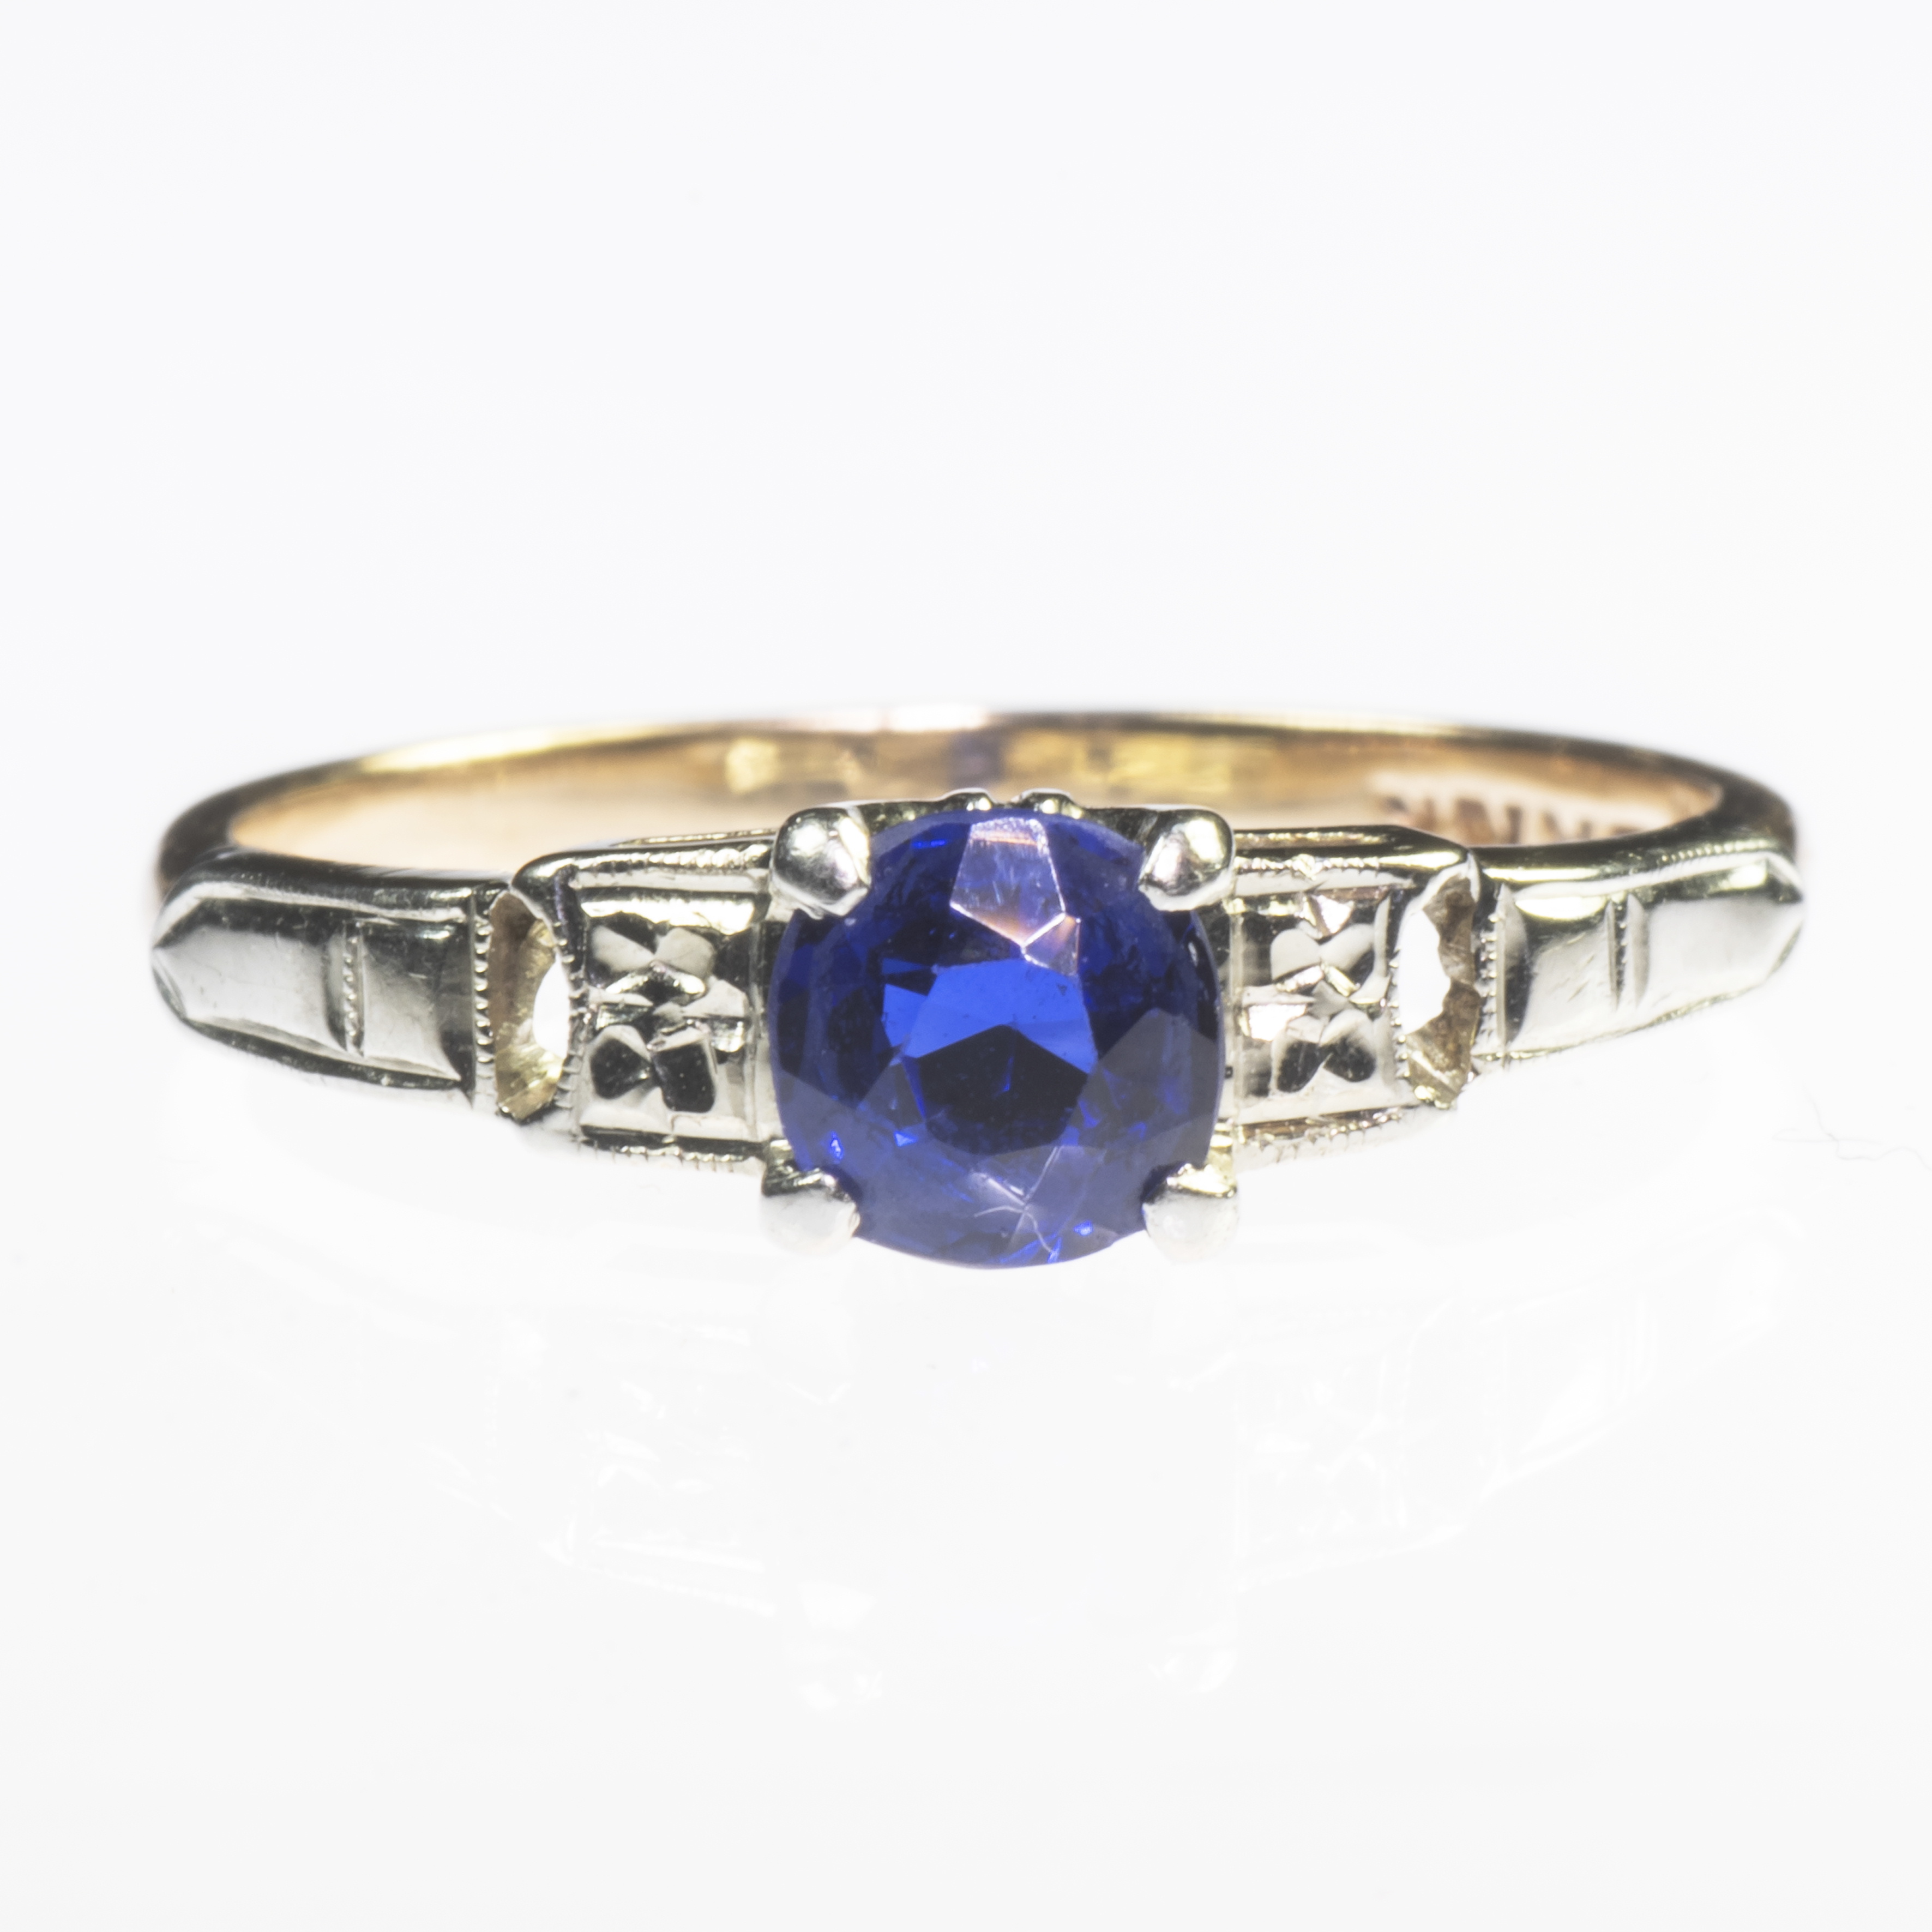 A GOLD AND ROUND CUT SAPPHIRE RING